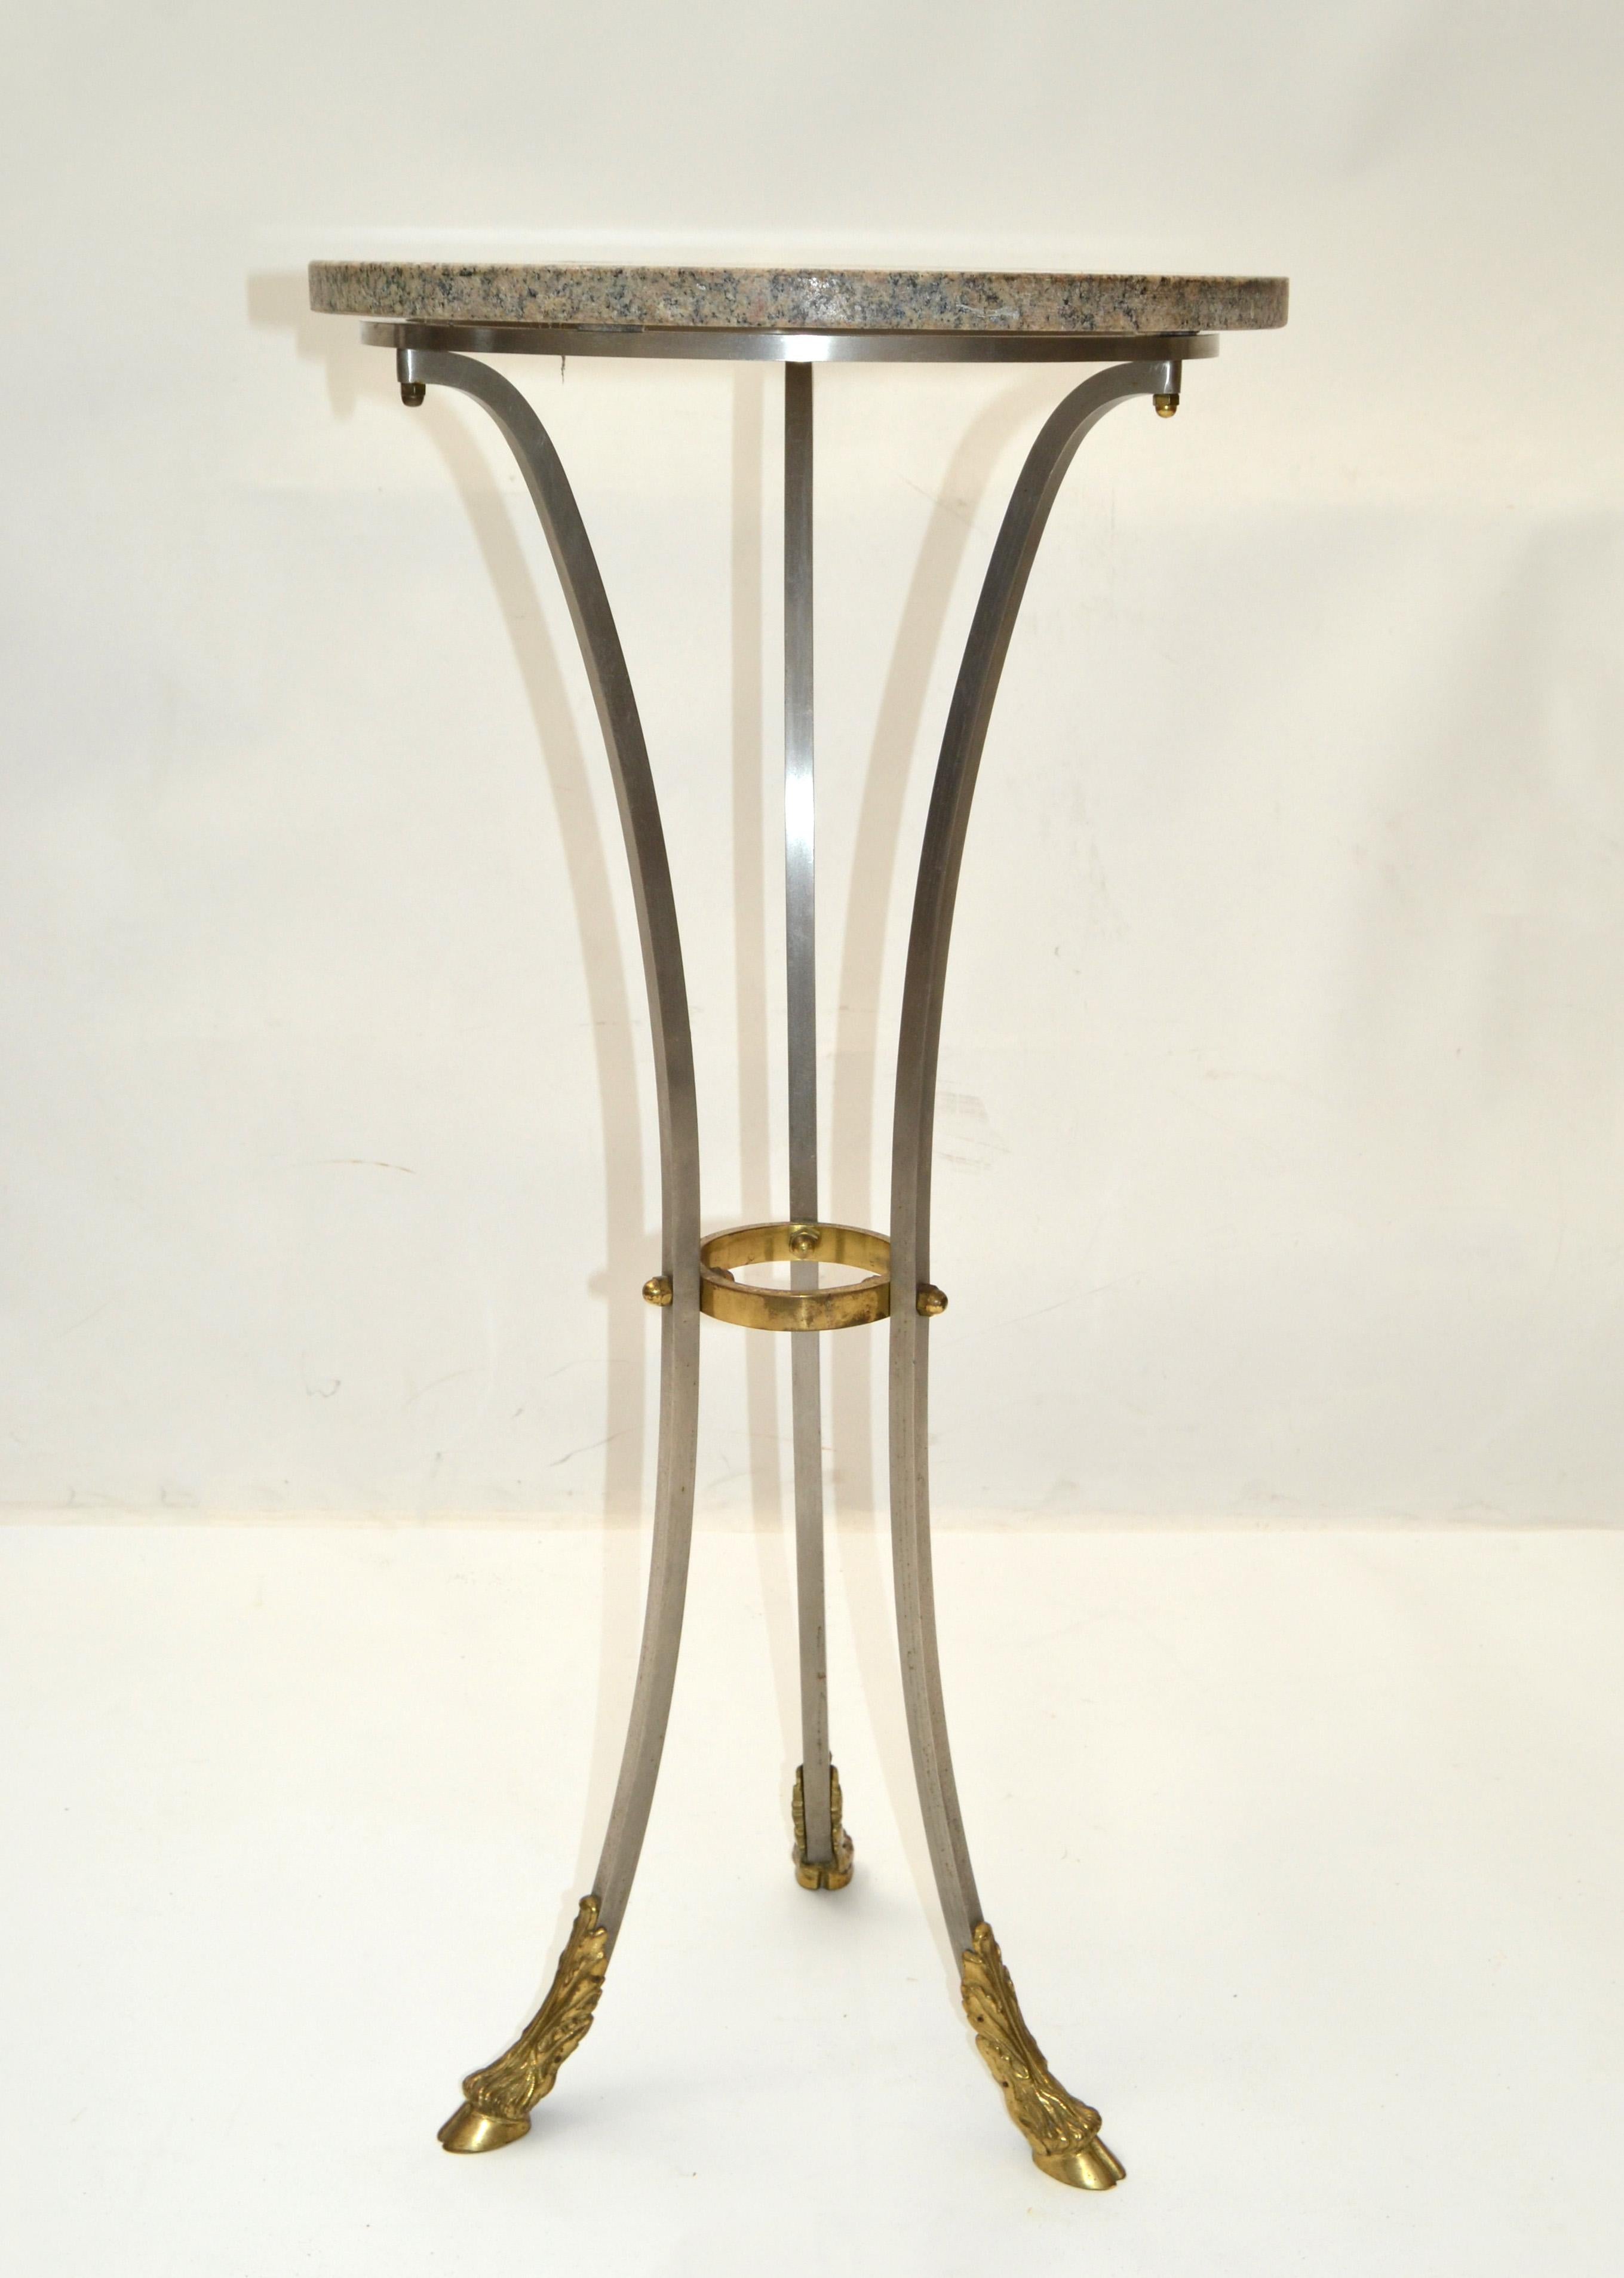 Maison Jansen French Neoclassical Steel & Bronze Hoof Feet Pedestal Drink Table In Good Condition For Sale In Miami, FL